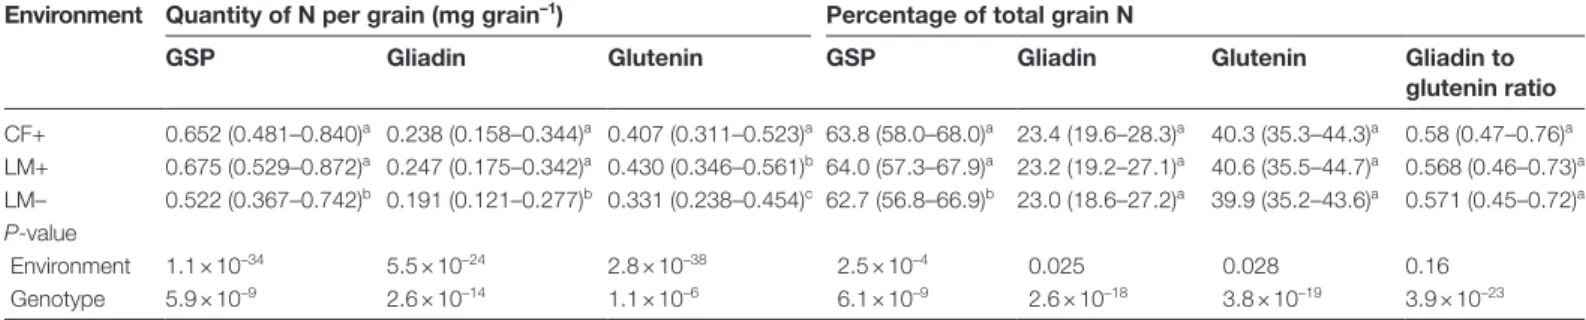 Table 2.  Grain storage protein, gliadin, and glutenin as quantity per grain and percentage of total grain N and the gliadin to glutenin  ratio for 196 wheat accessions grown in the field in 2006 at Clermont-Ferrand under high N condition and in 2007 at Le